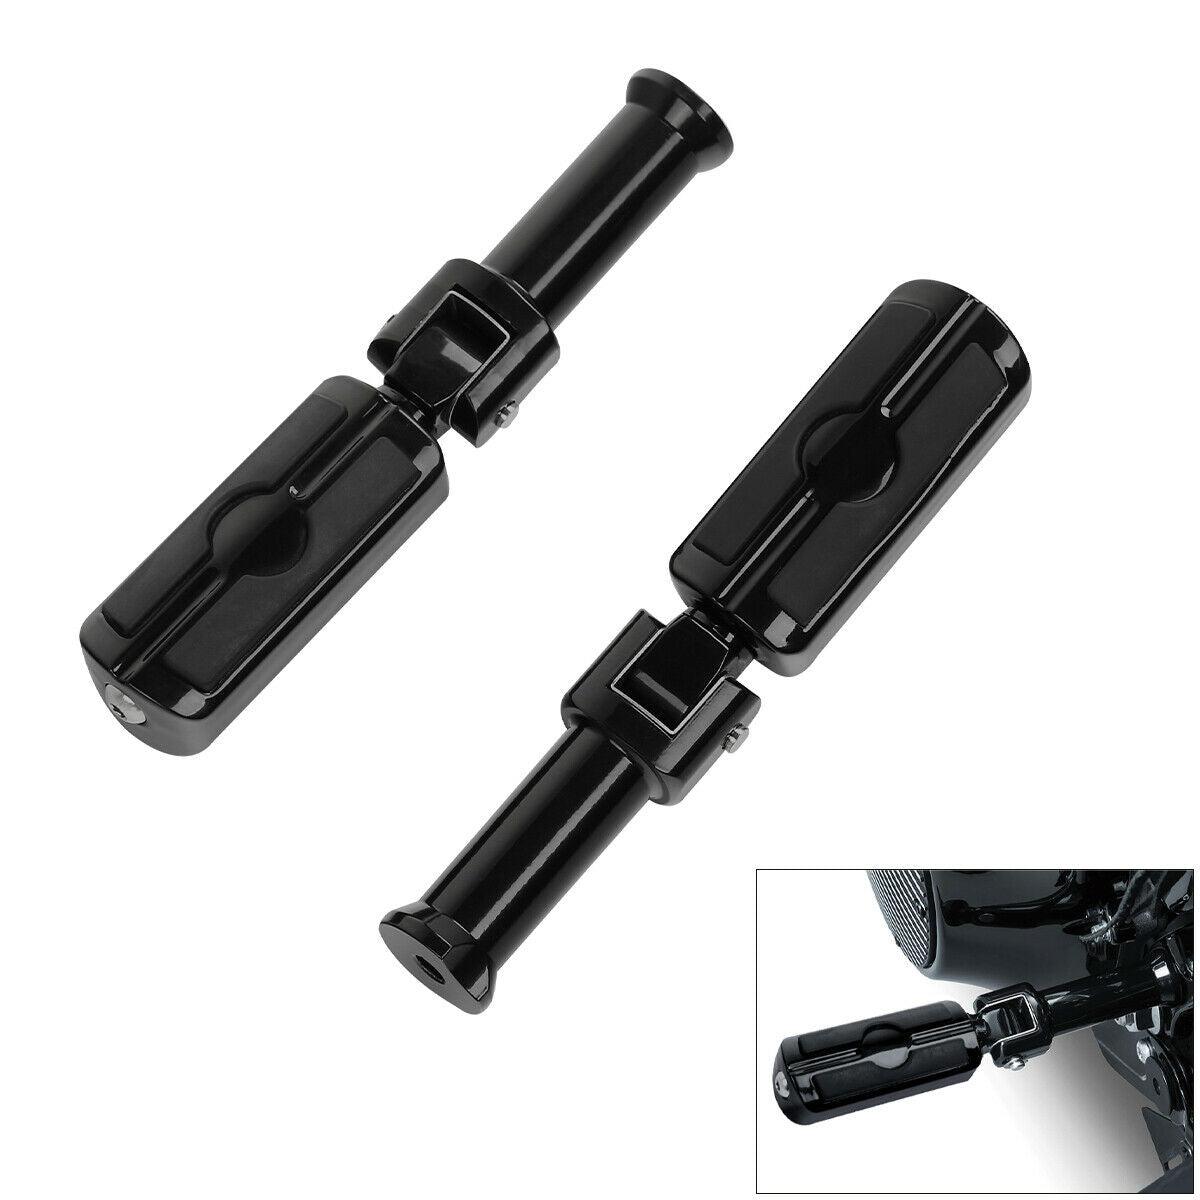 Rear Passenger Foot Pegs Pedal Fit For Harley Street Bob Low Rider 2018-2020 19 - Moto Life Products